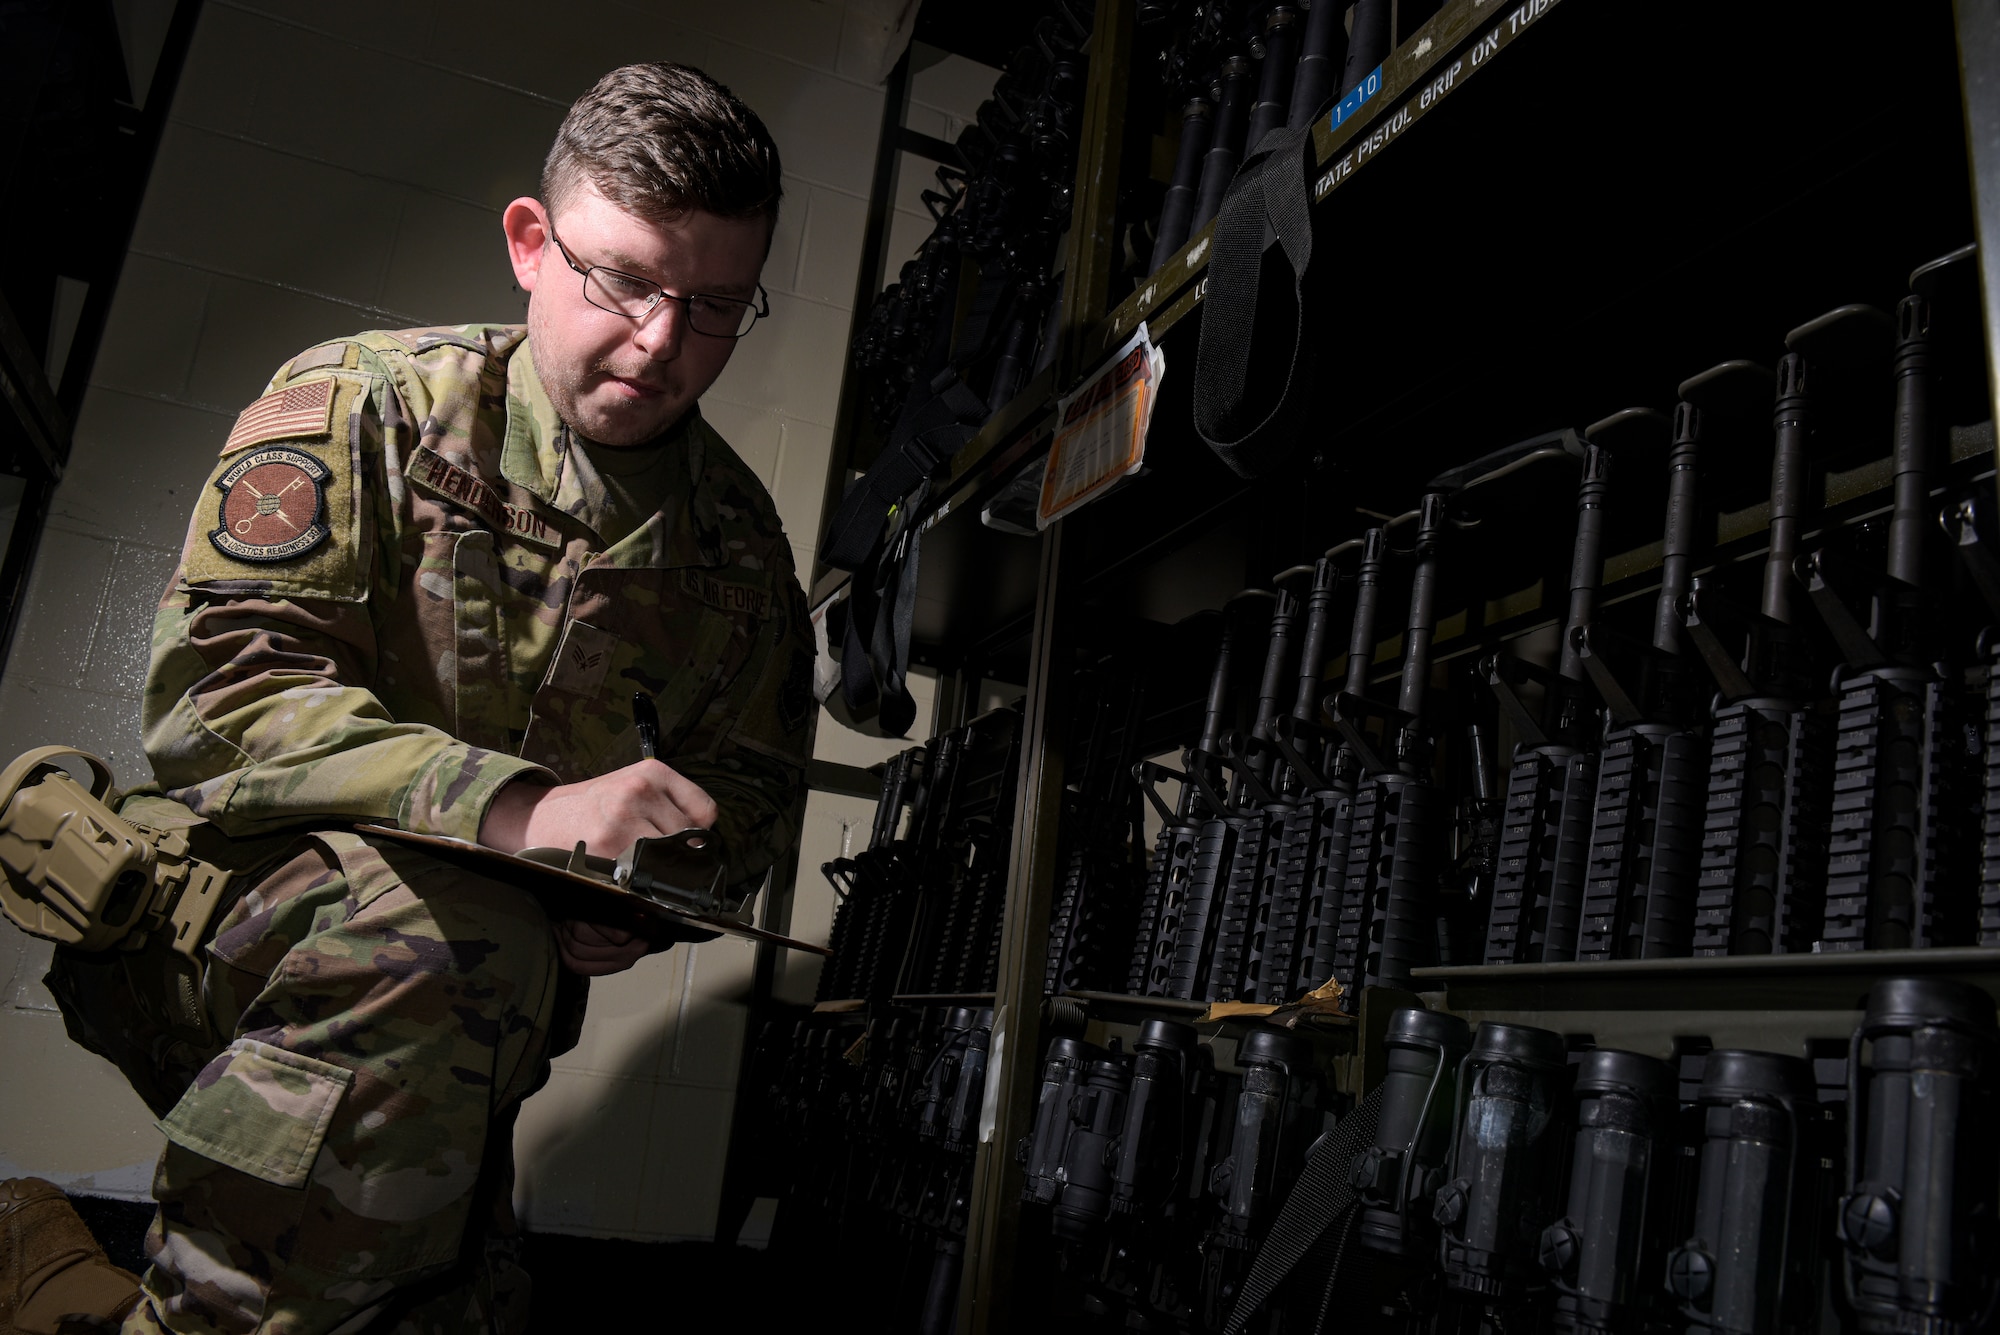 U.S. Air Force Senior Airman Robert Henderson, a 6th Logistics Readiness Squadron Individual Protective Equipment (IPE) technician, takes inventory of a M-16 assault rifle weapons rack at MacDill Air Force Base, Florida, Jan. 18, 2022.